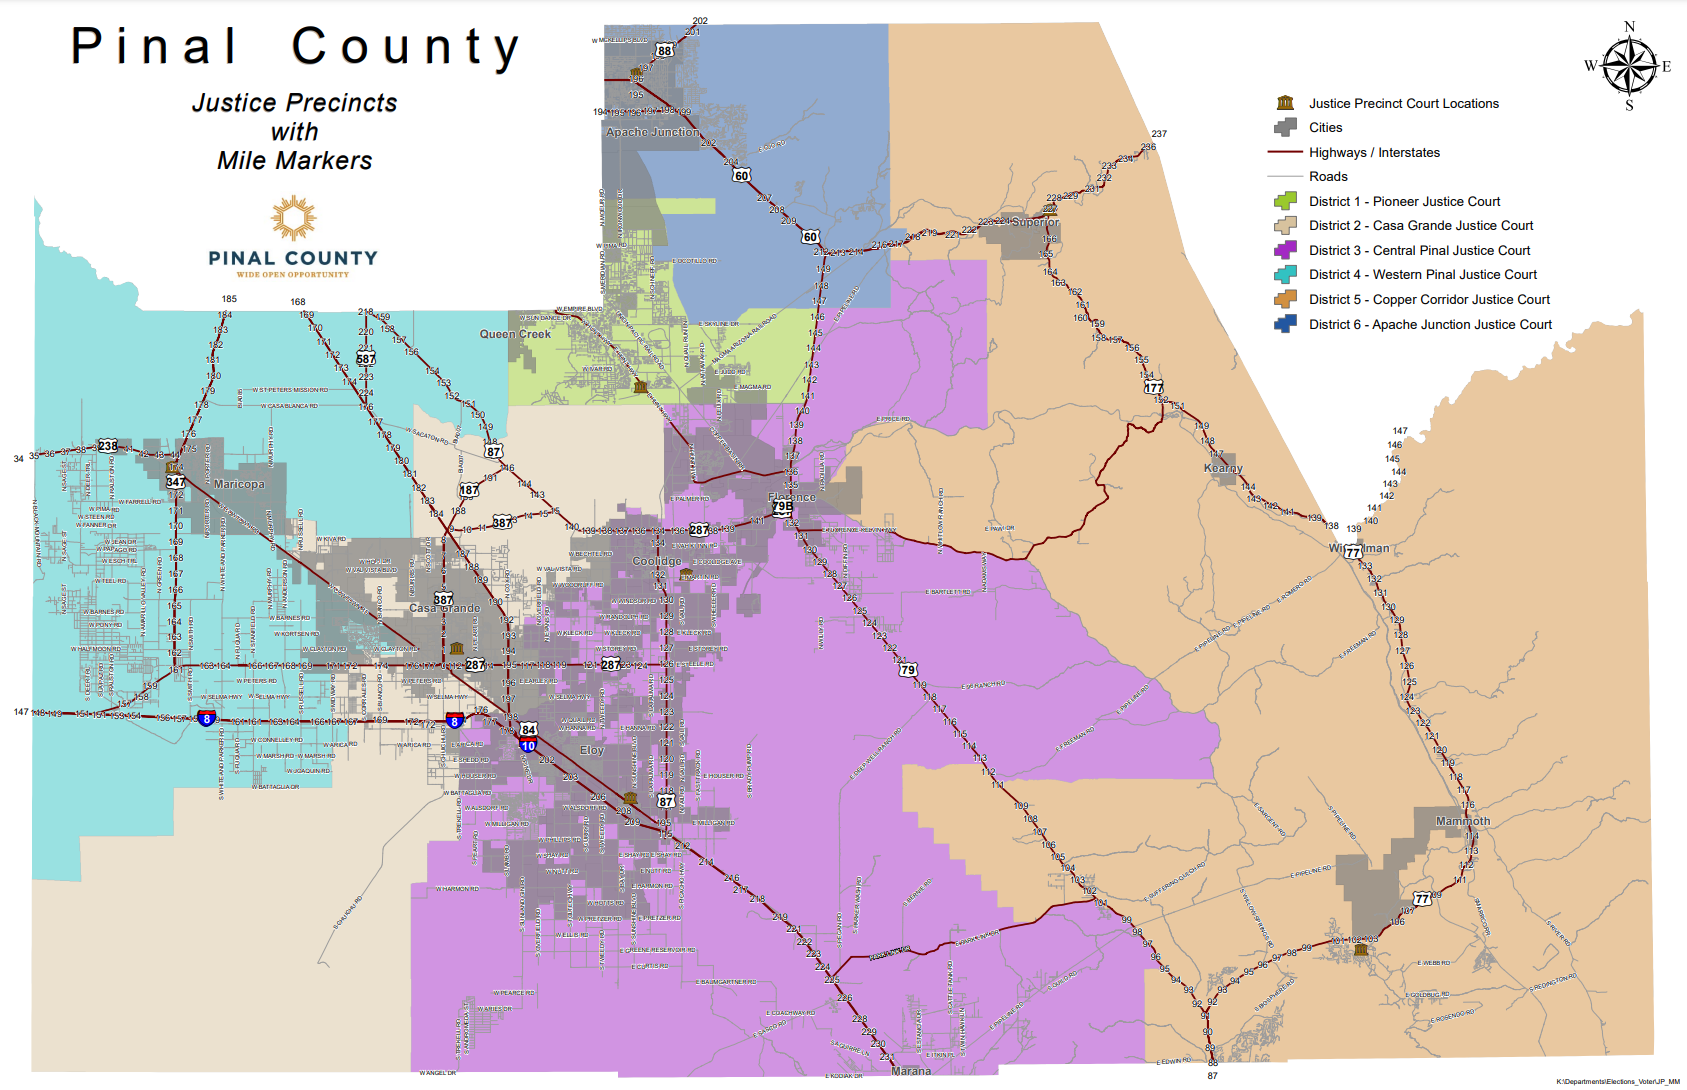 Board Of Supervisors Approve New Supervisor District And Justice Precinct Maps Supervisor 1469